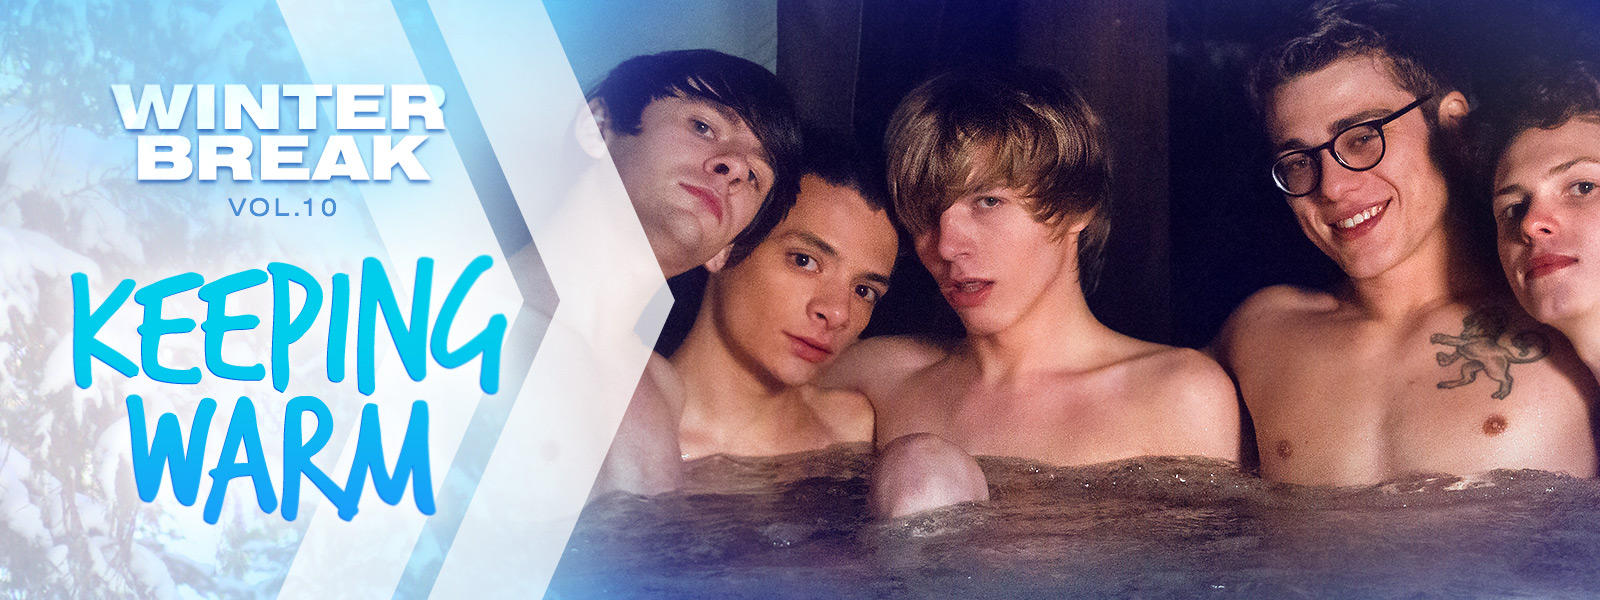 Teen Twink Blake Mitchell & other horny boys relaxing in the hot tub